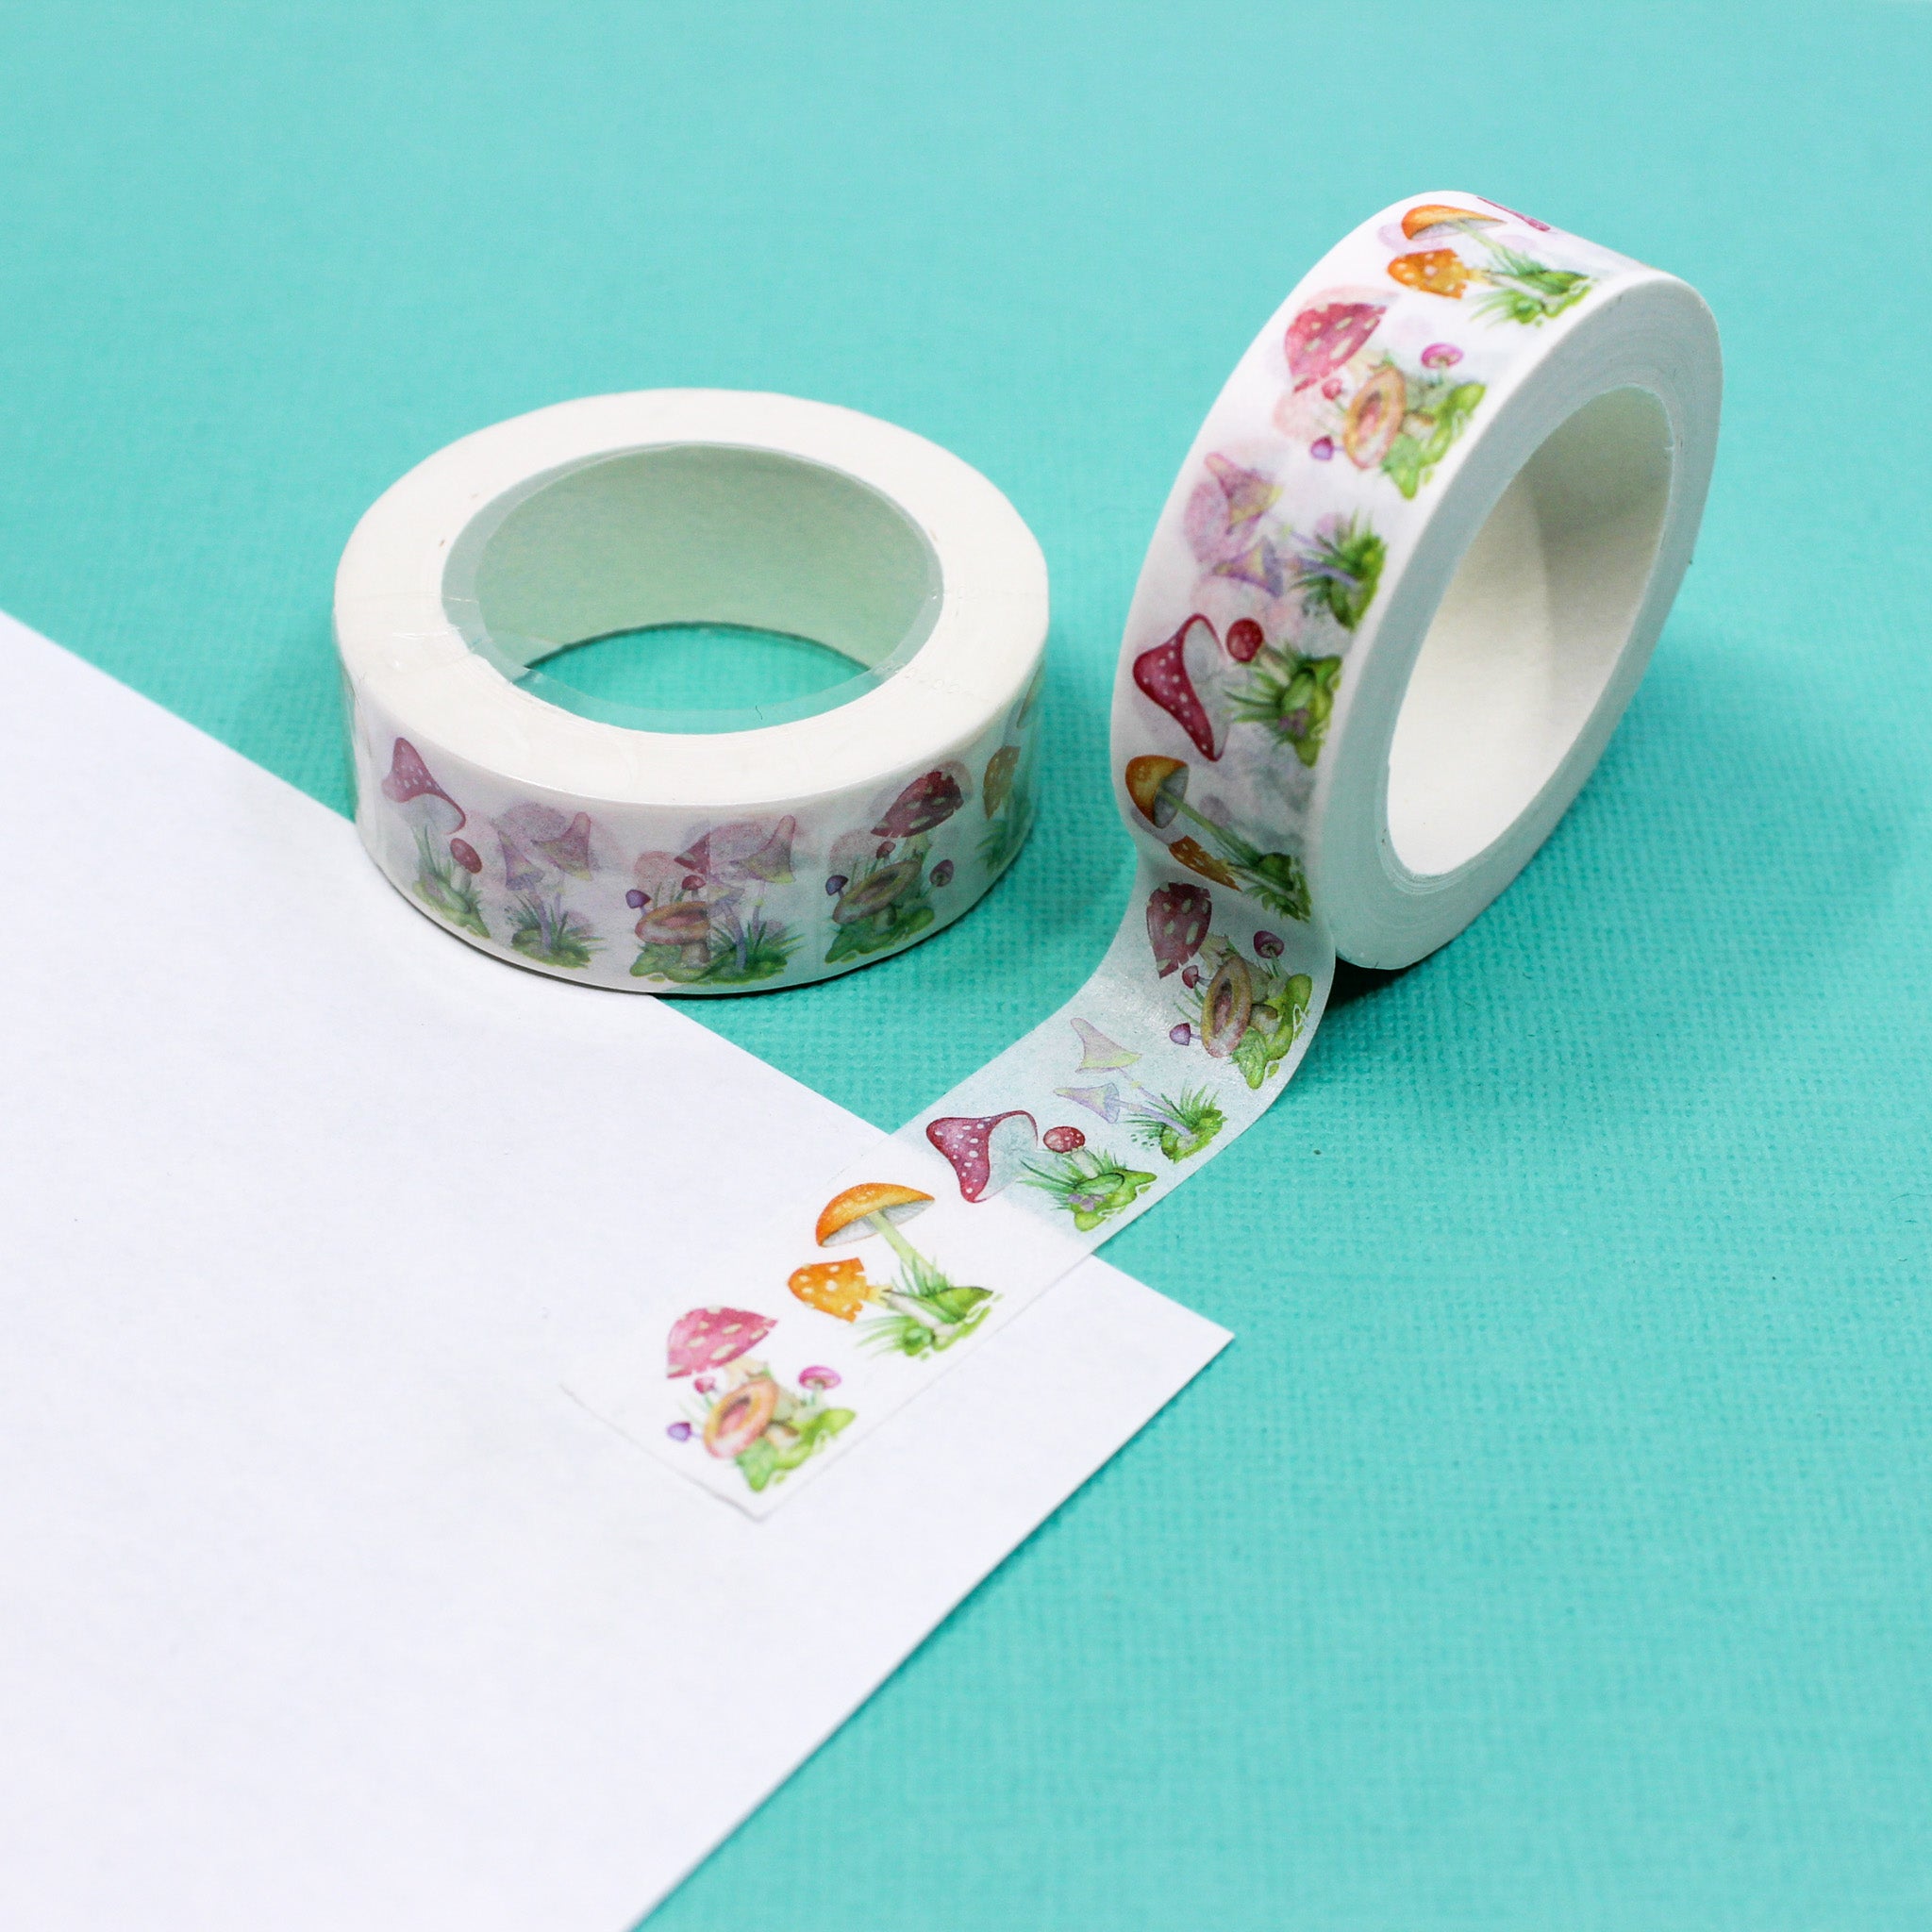 This is a pastel color mushrooms pattern washi tape from BBB Supplies Craft Shop